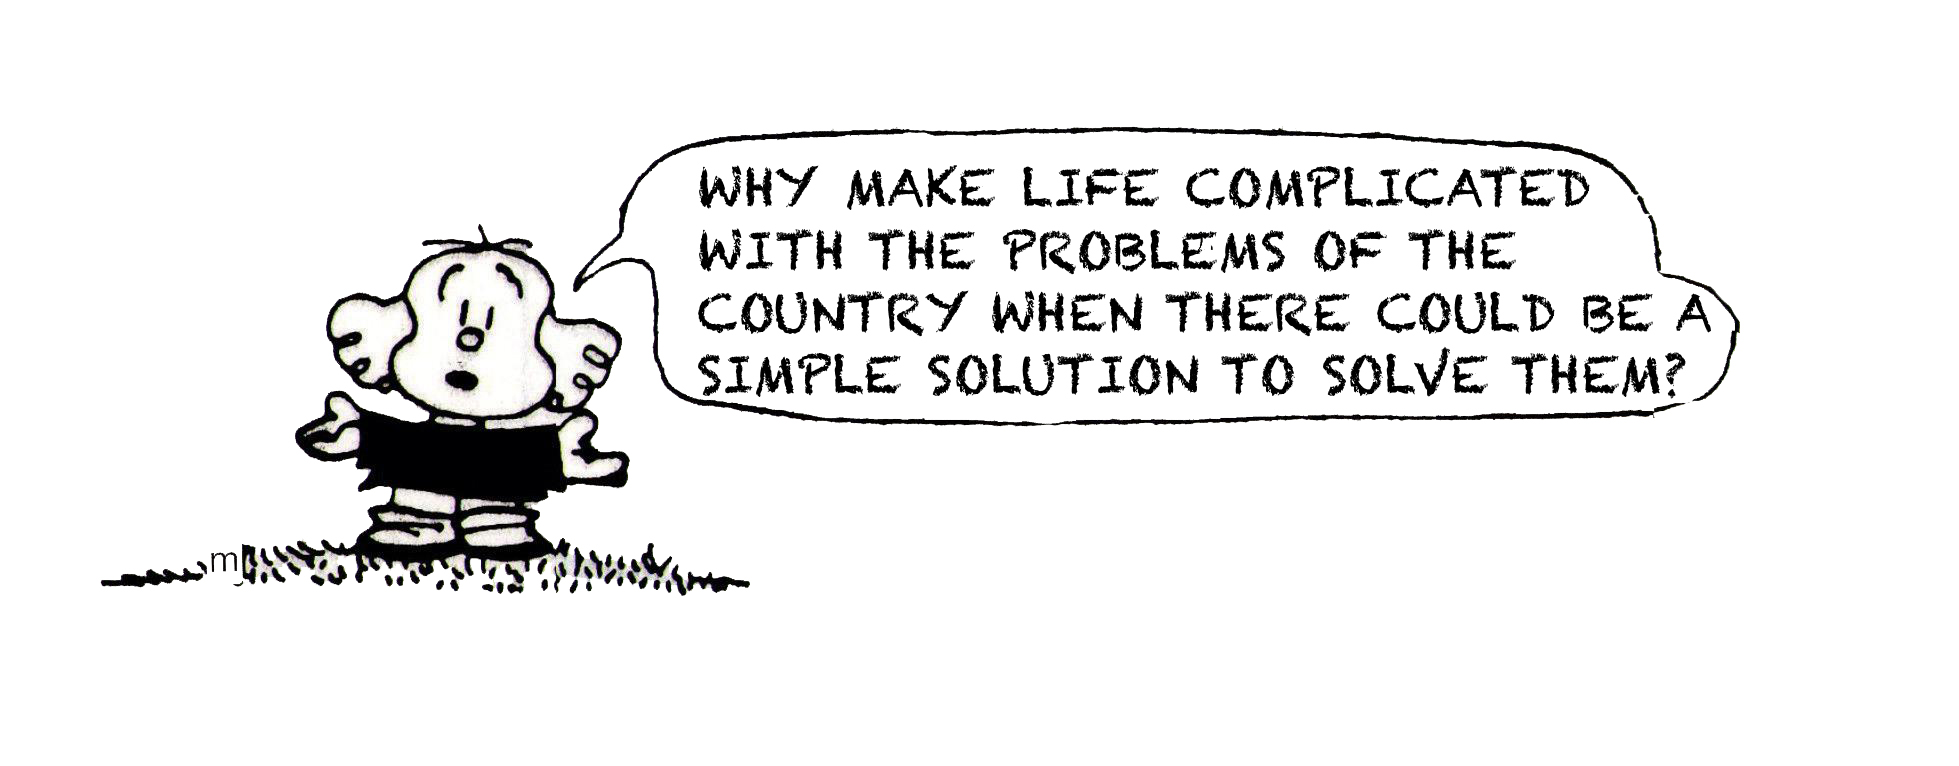 Why make life complicated with the problems of the country when there could be a simple solution to solve them?